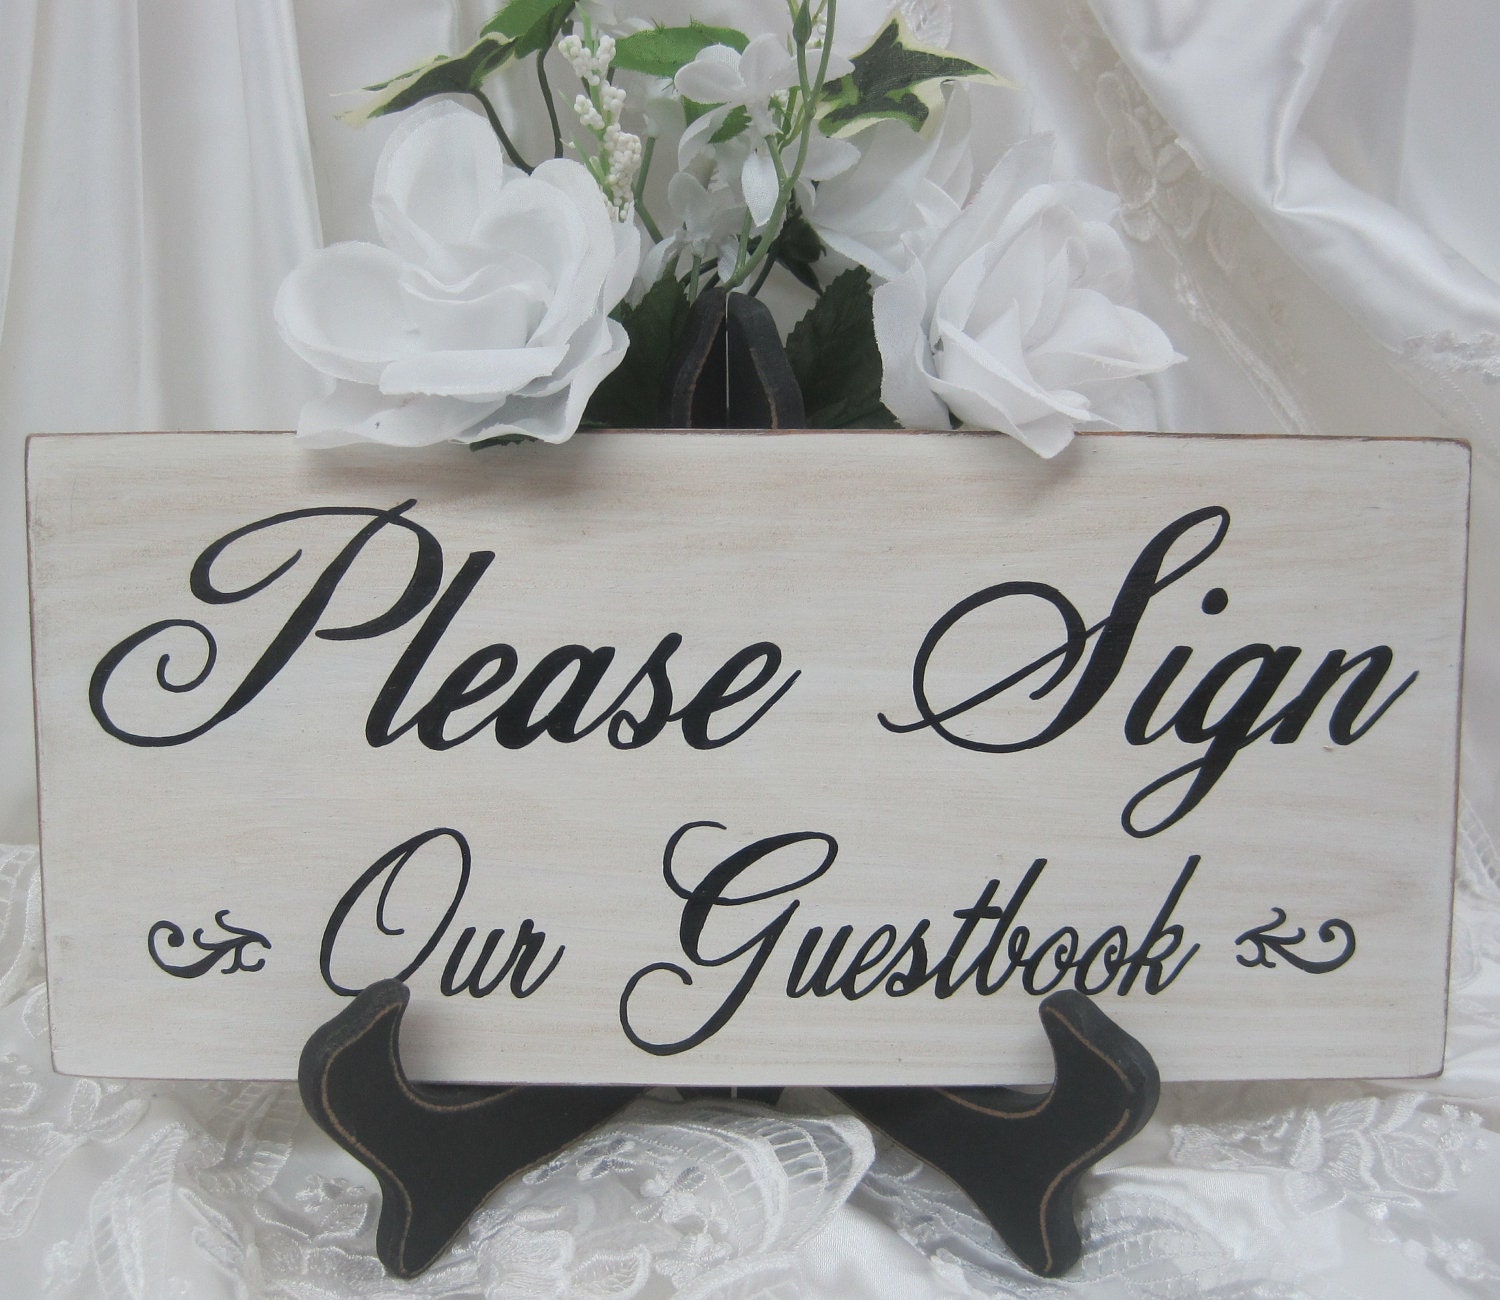 Rustic Wedding Sign Please Sign Our Guestbook Ceremony Reception Gift Table Guest book